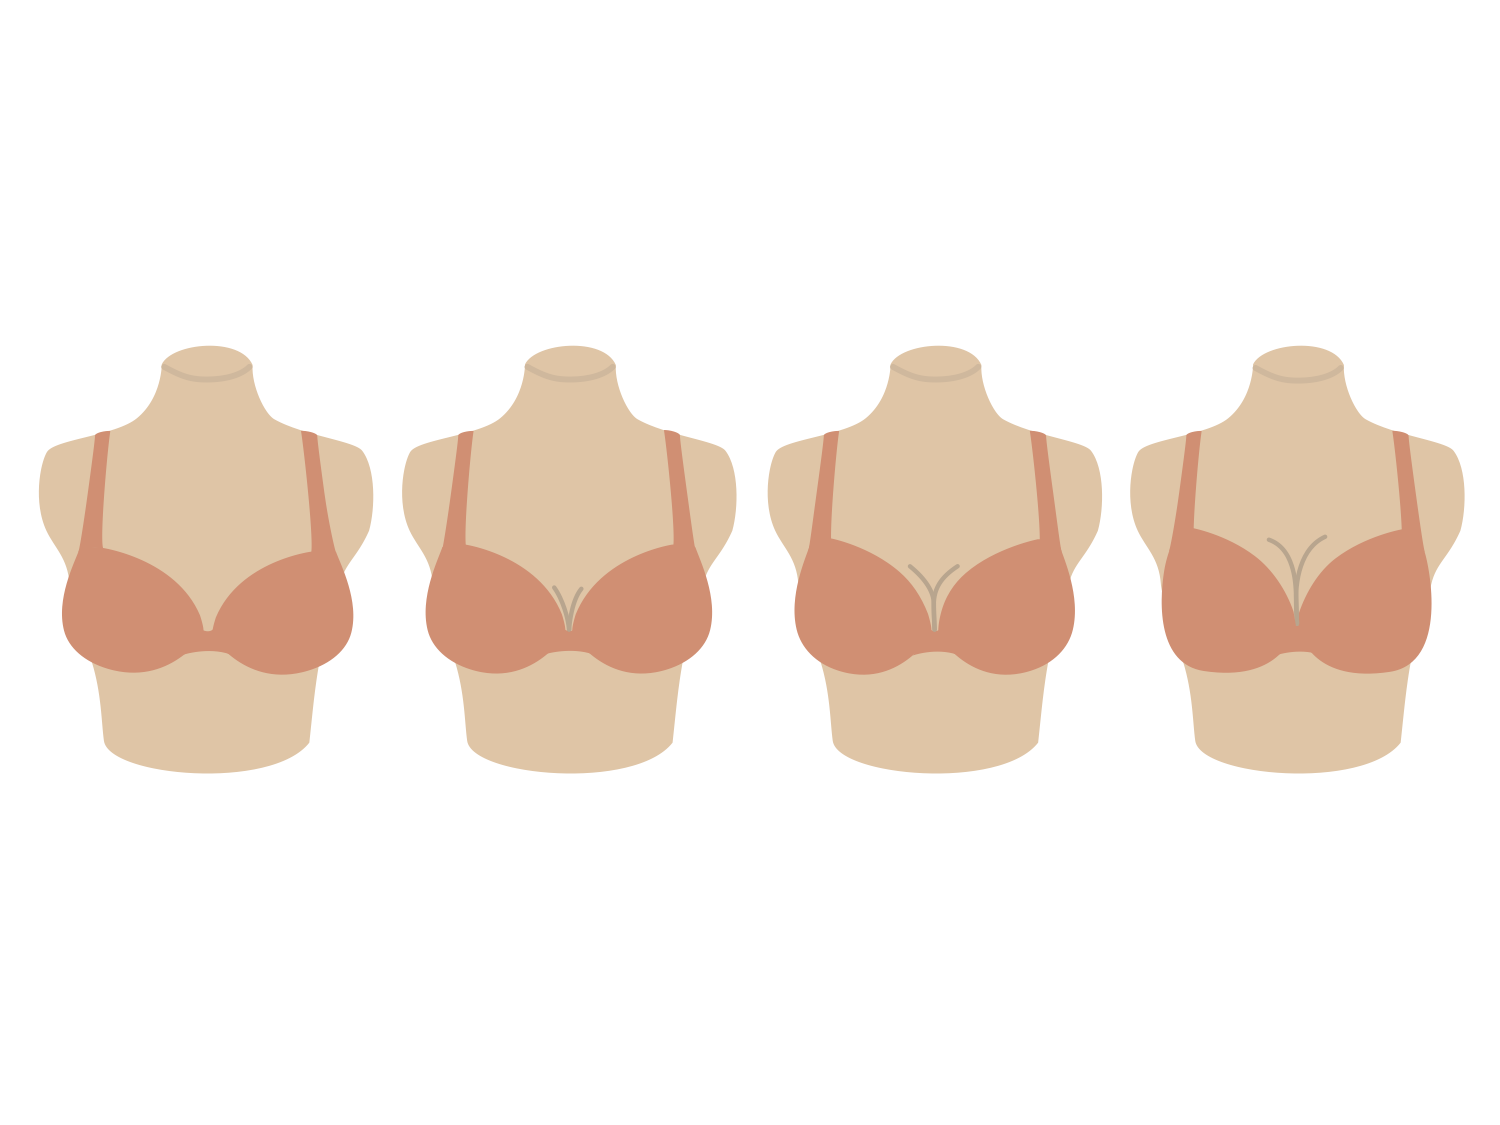 Sister Size' For Bras: What Are They and Do They Work?